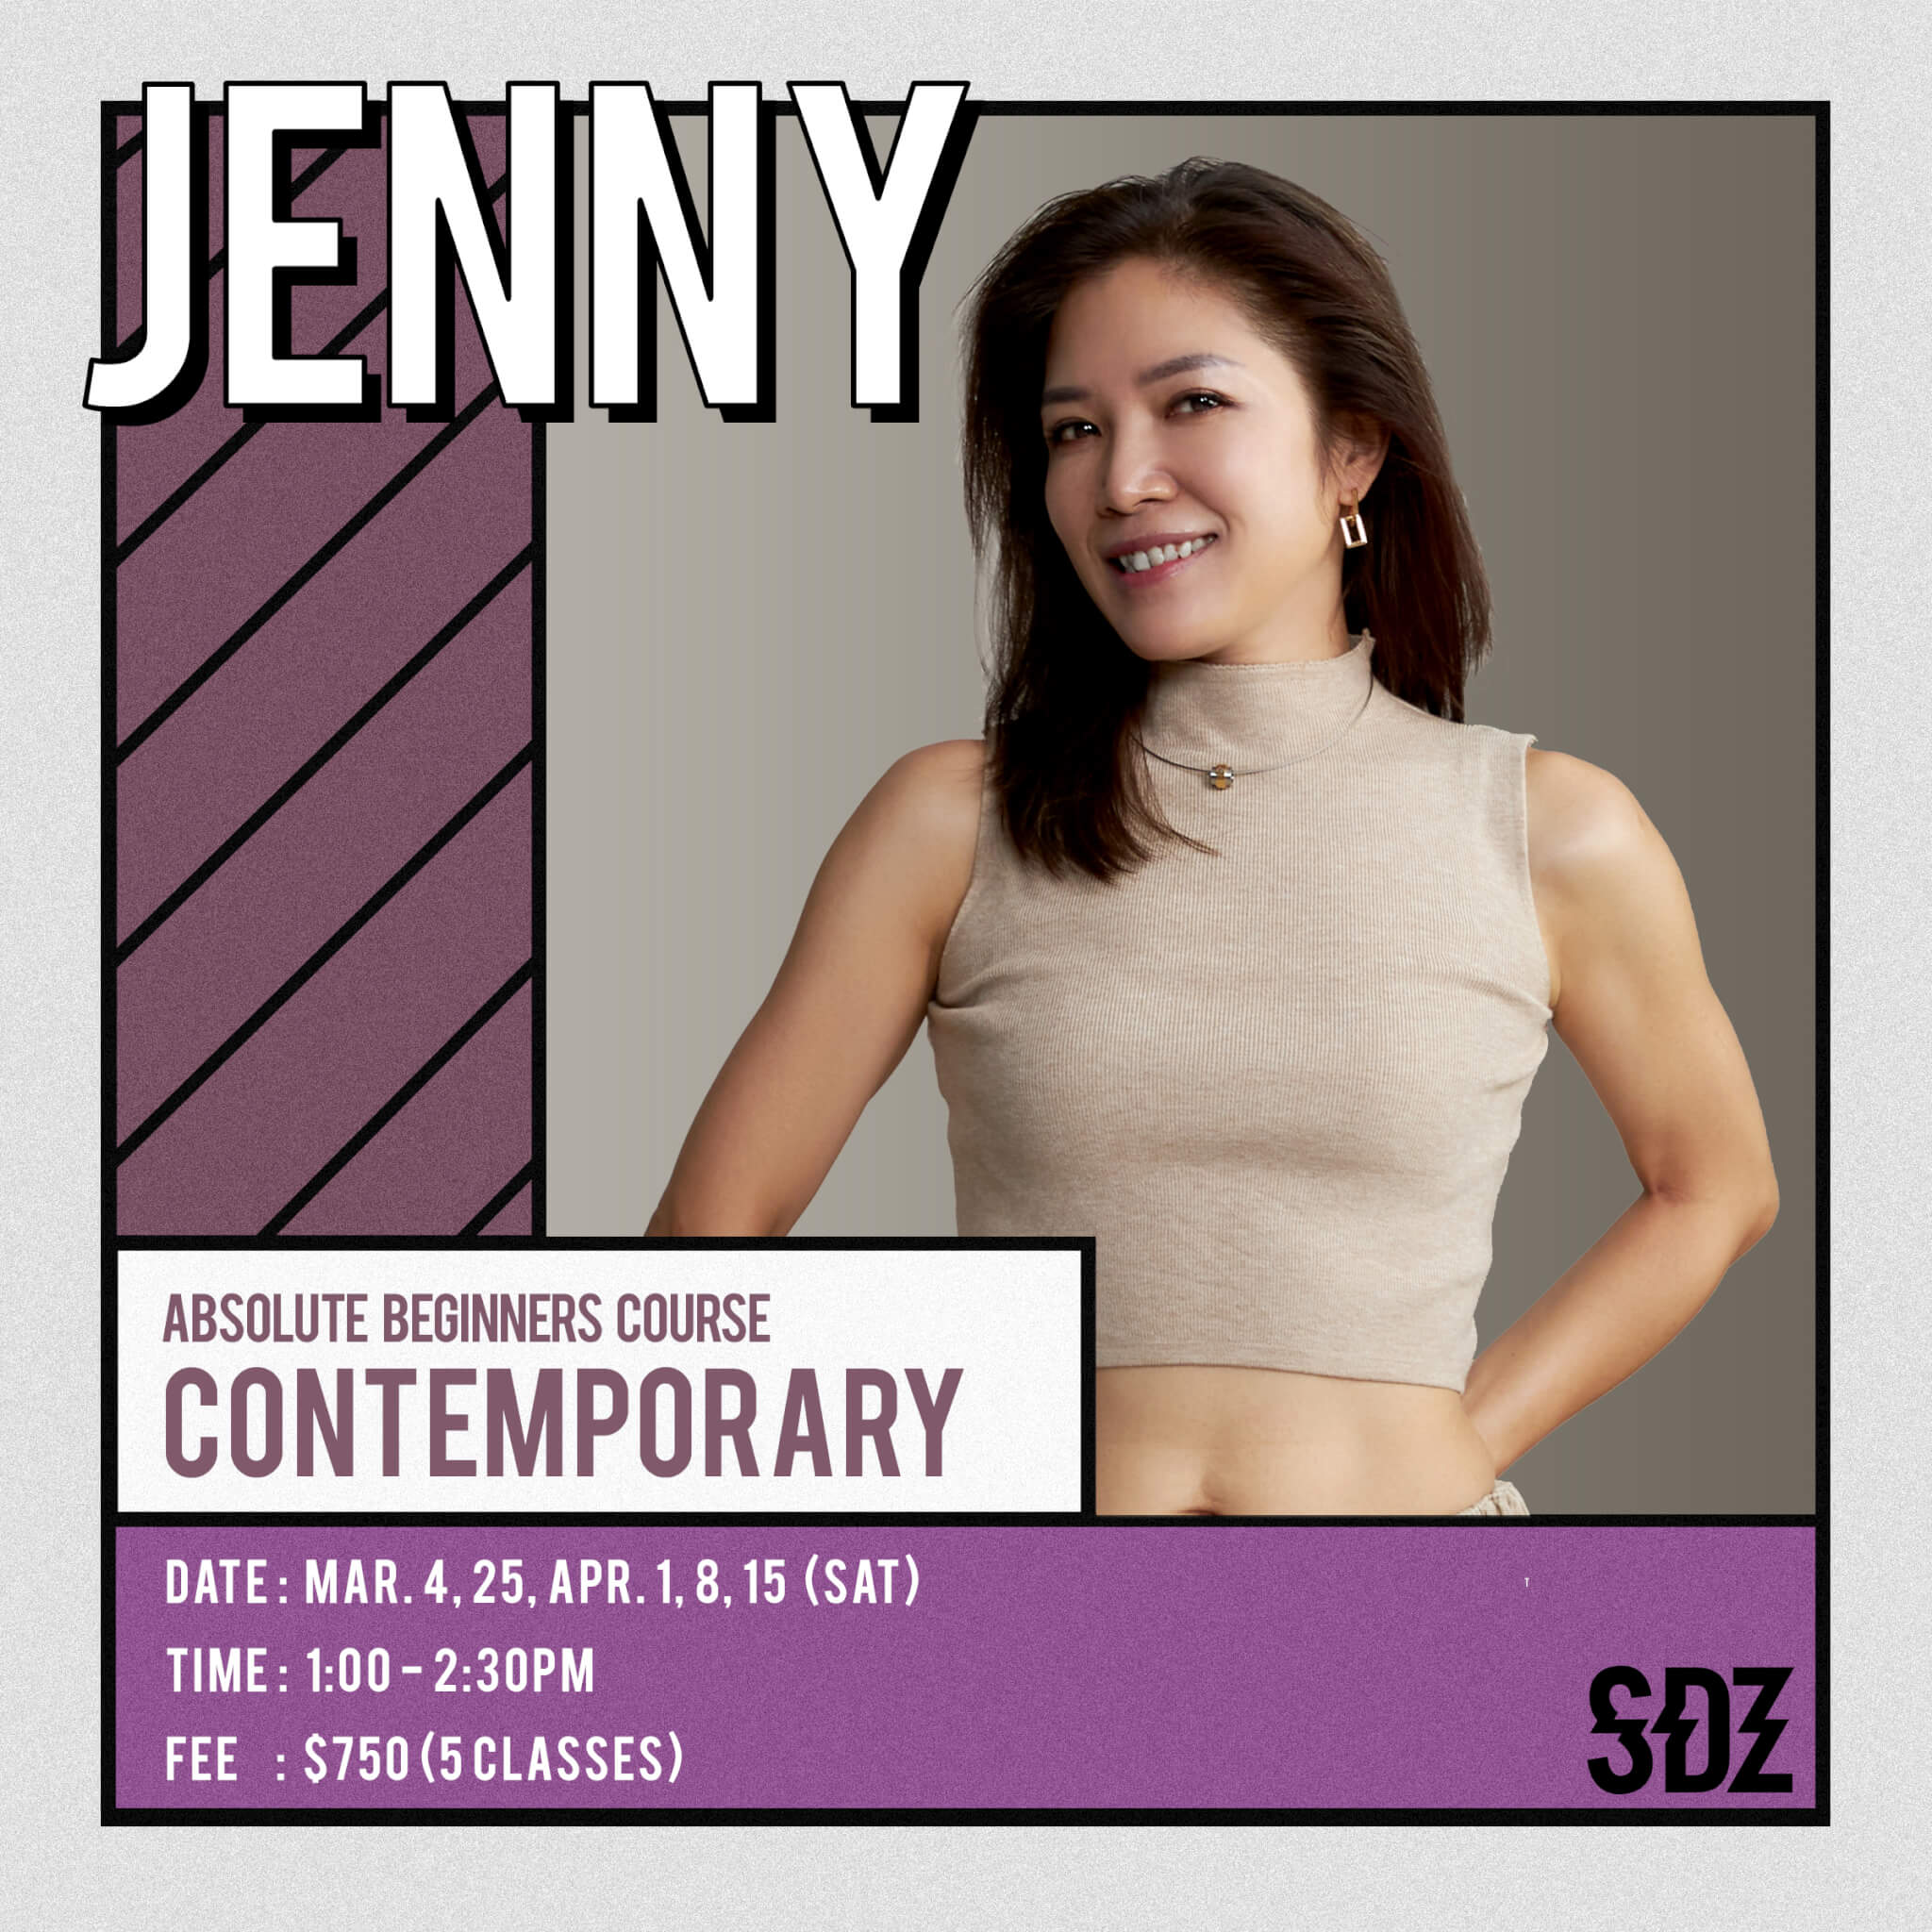 Absolute Beginners Course - Contemporary - Jenny